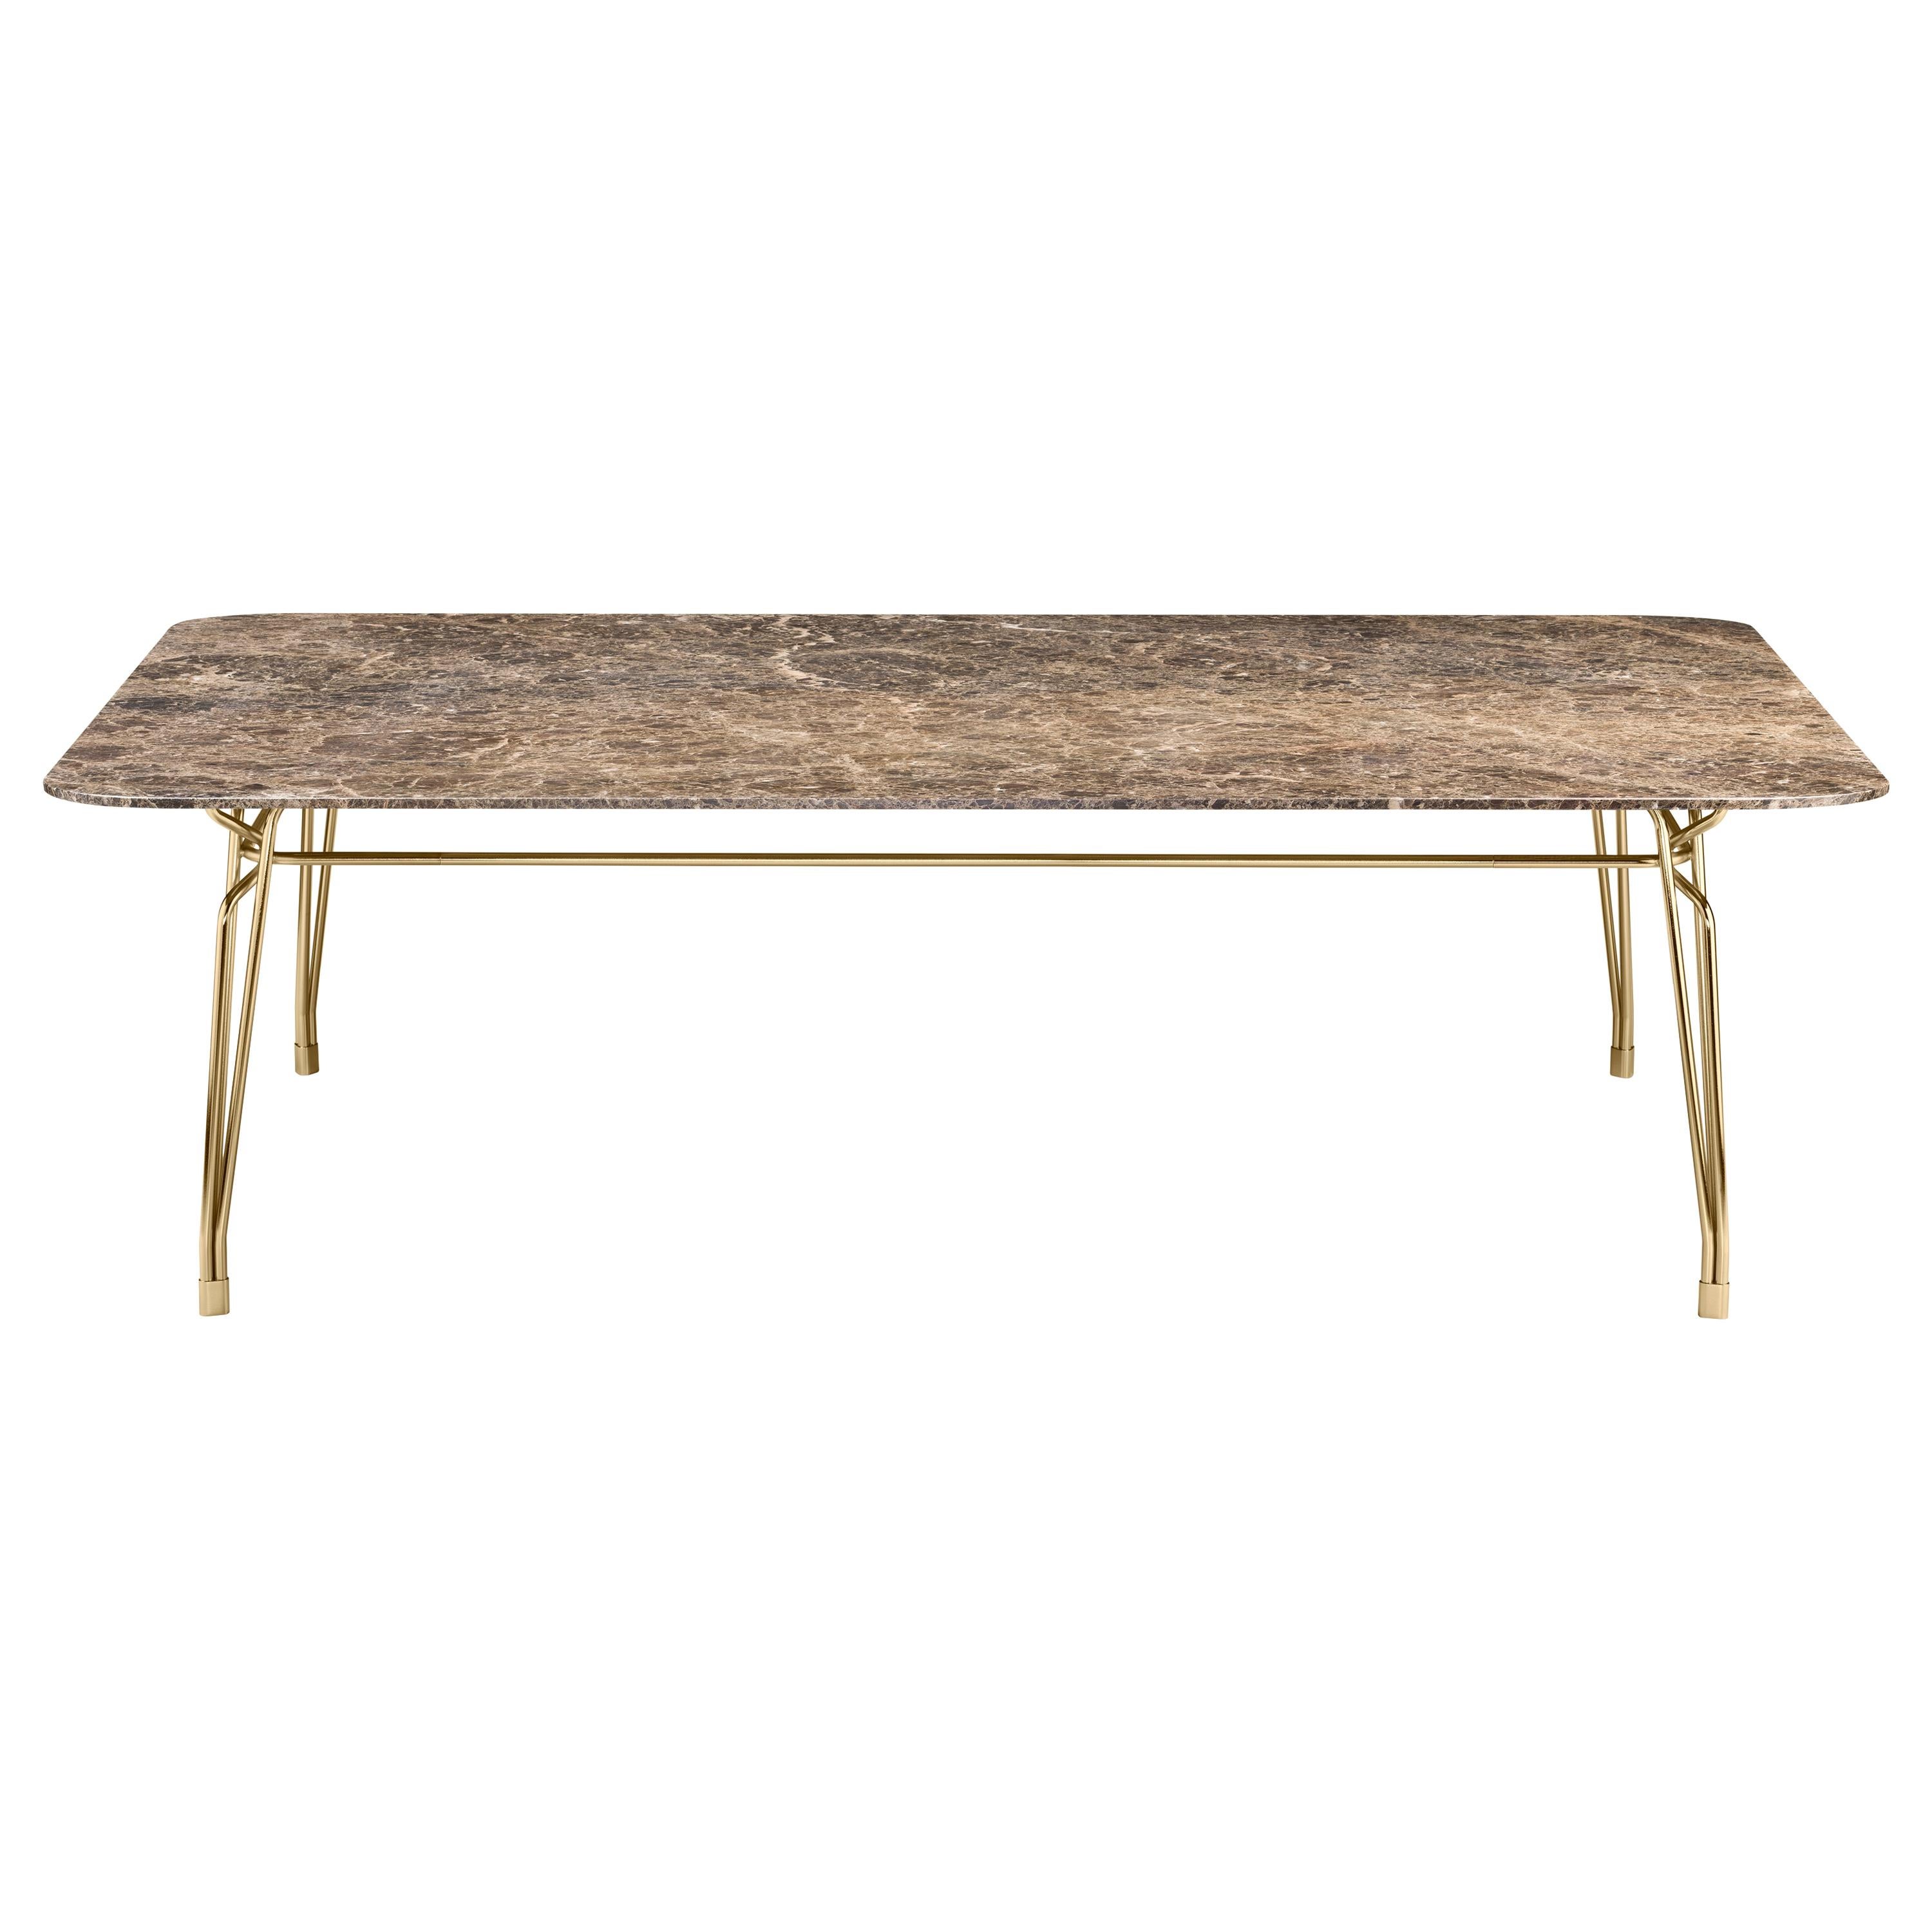 Botany Dining Table in Emperador Dark Marble Top with Polished Brass Legs